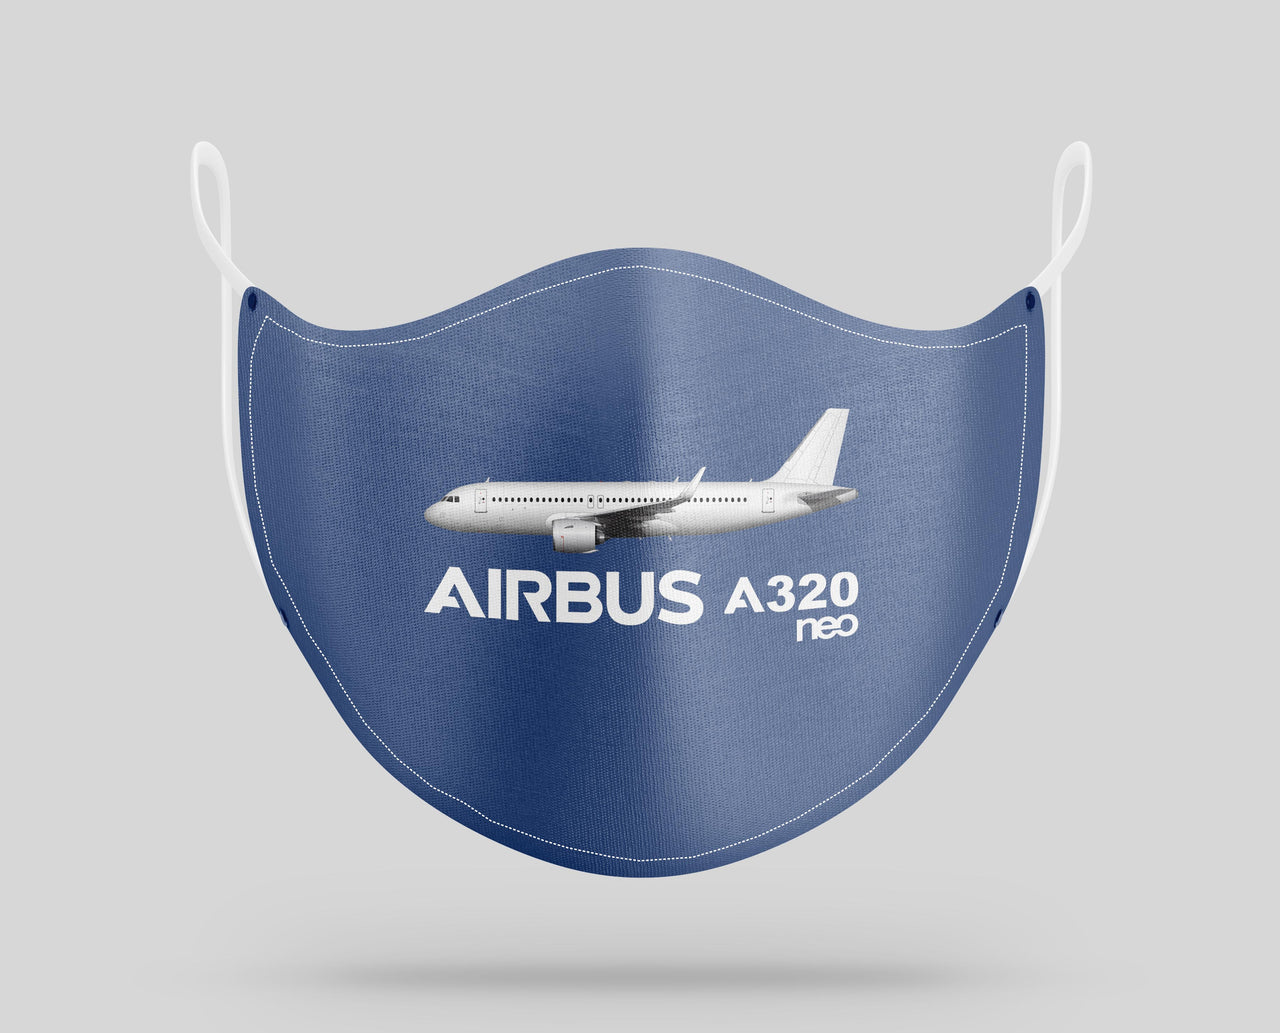 The Airbus A320neo Designed Face Masks